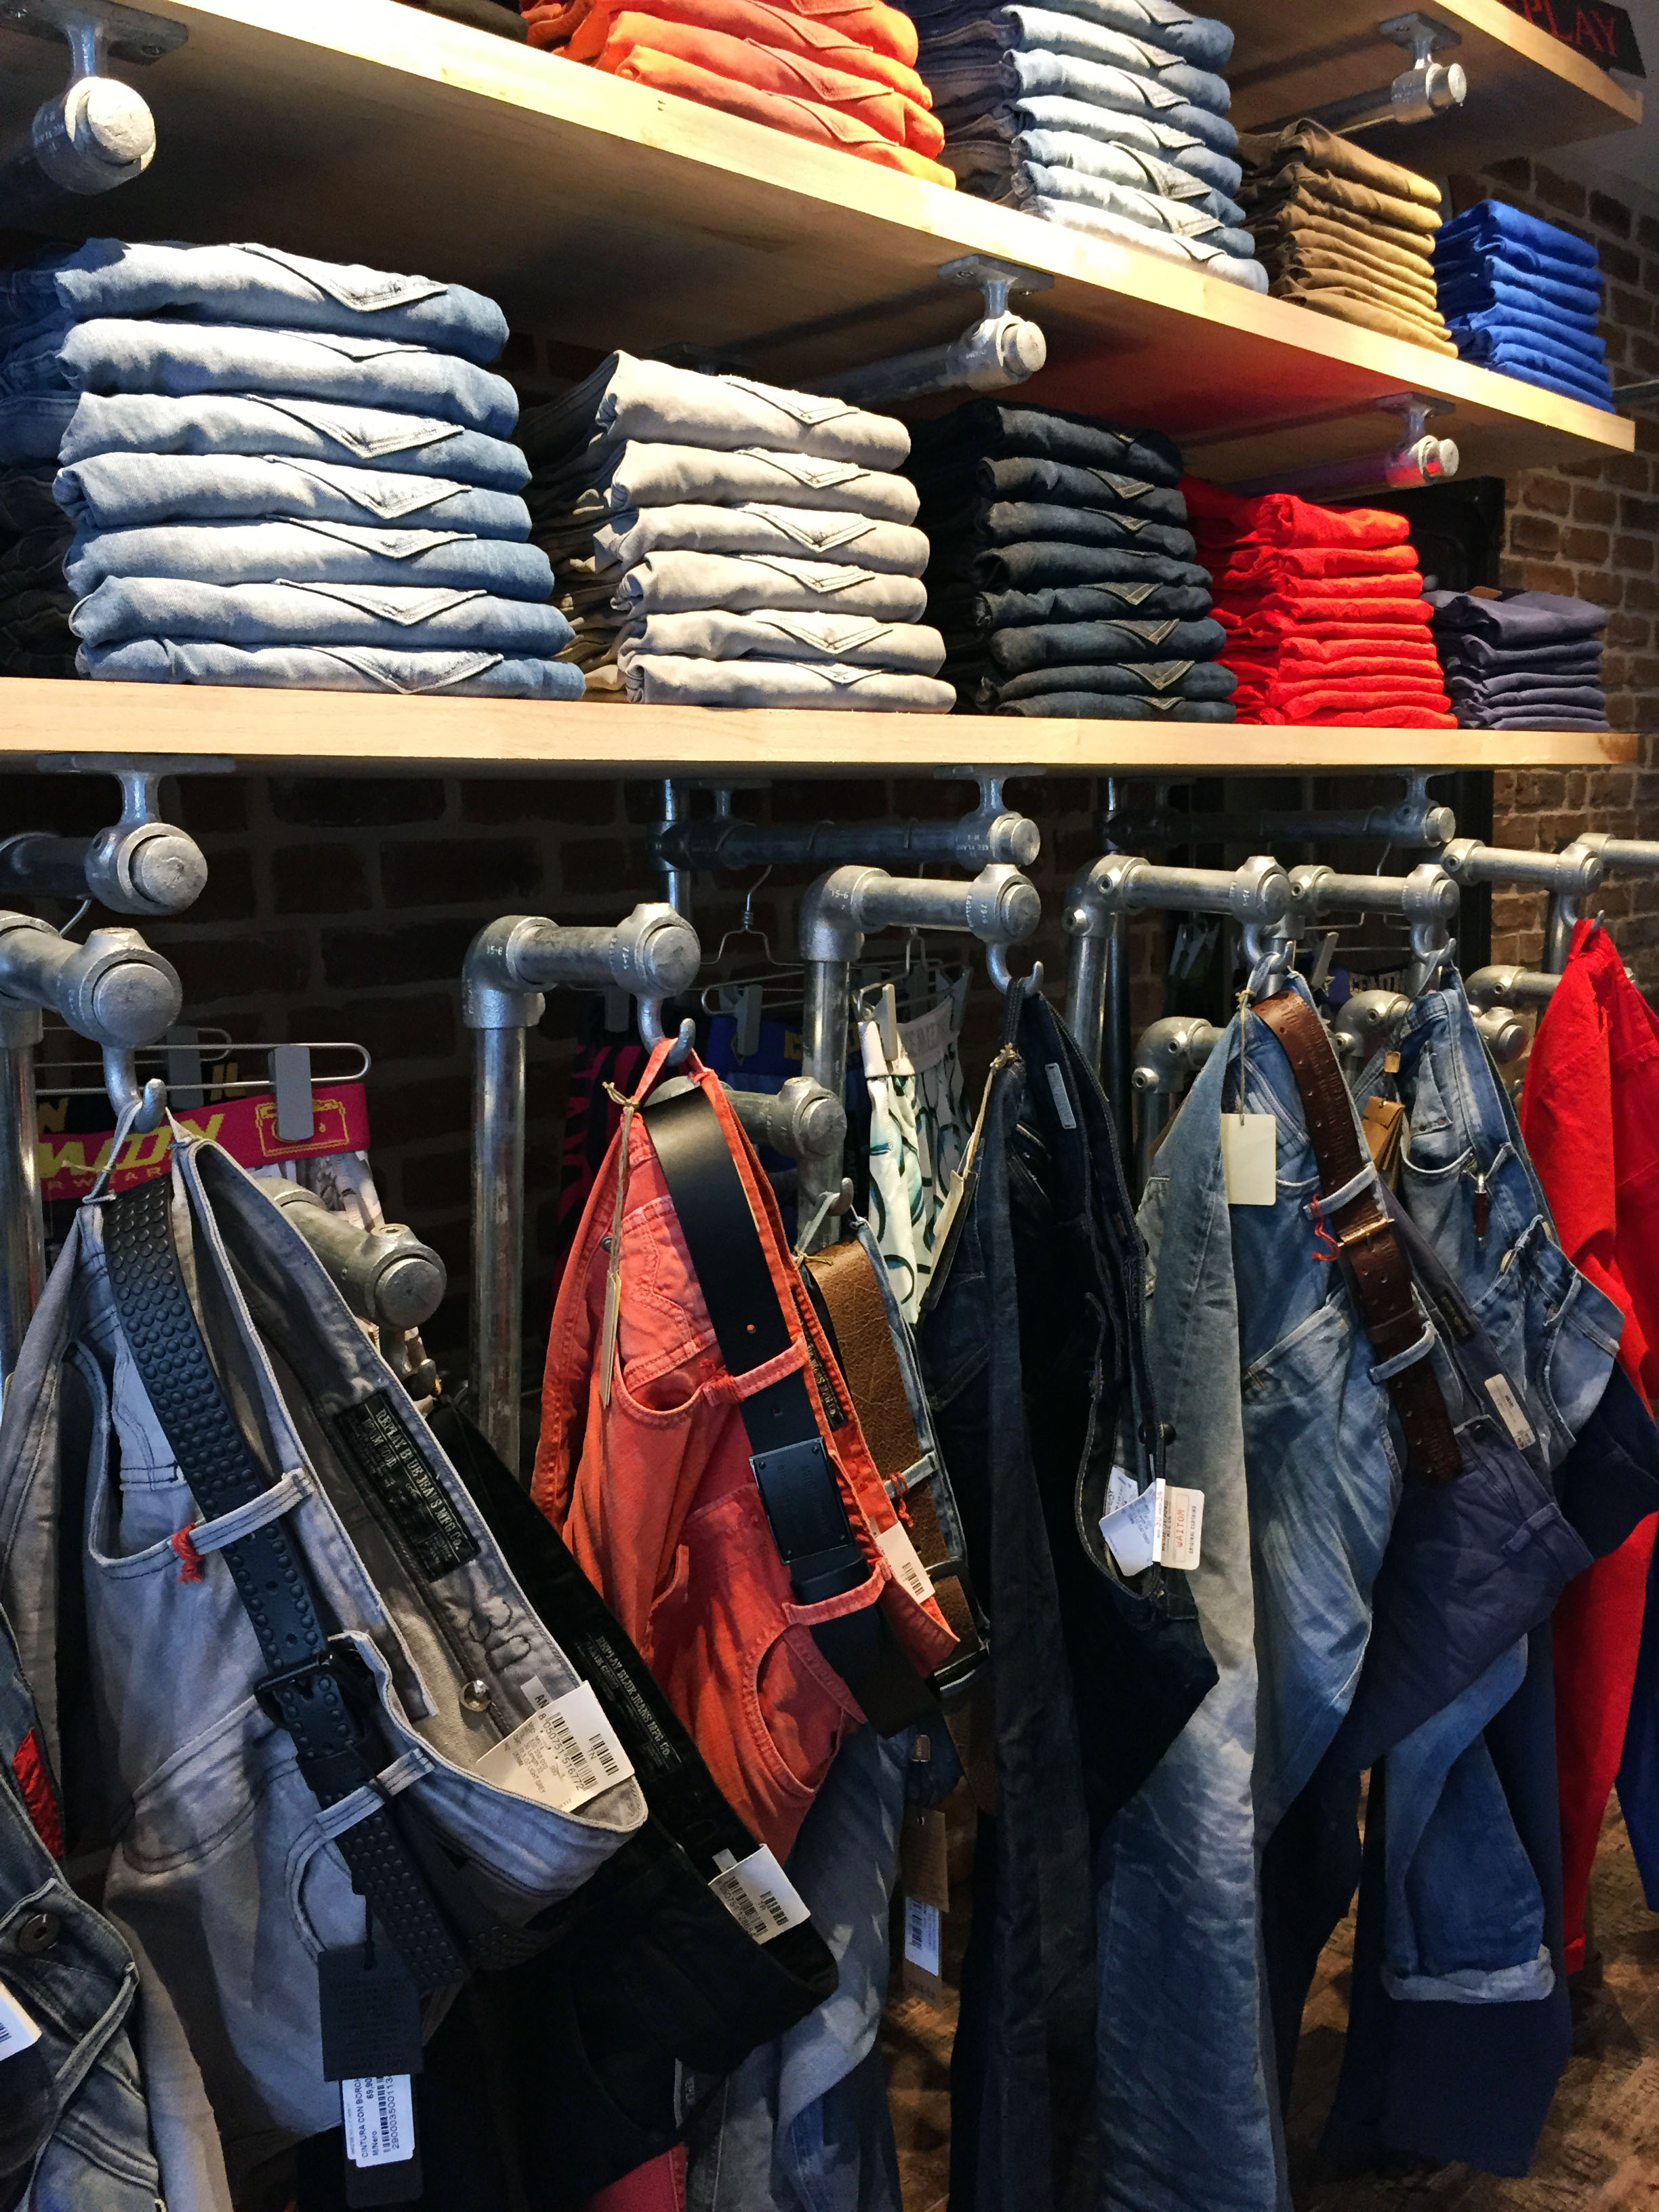 39 DIY Retail Display Ideas (from Clothing Racks to Signage